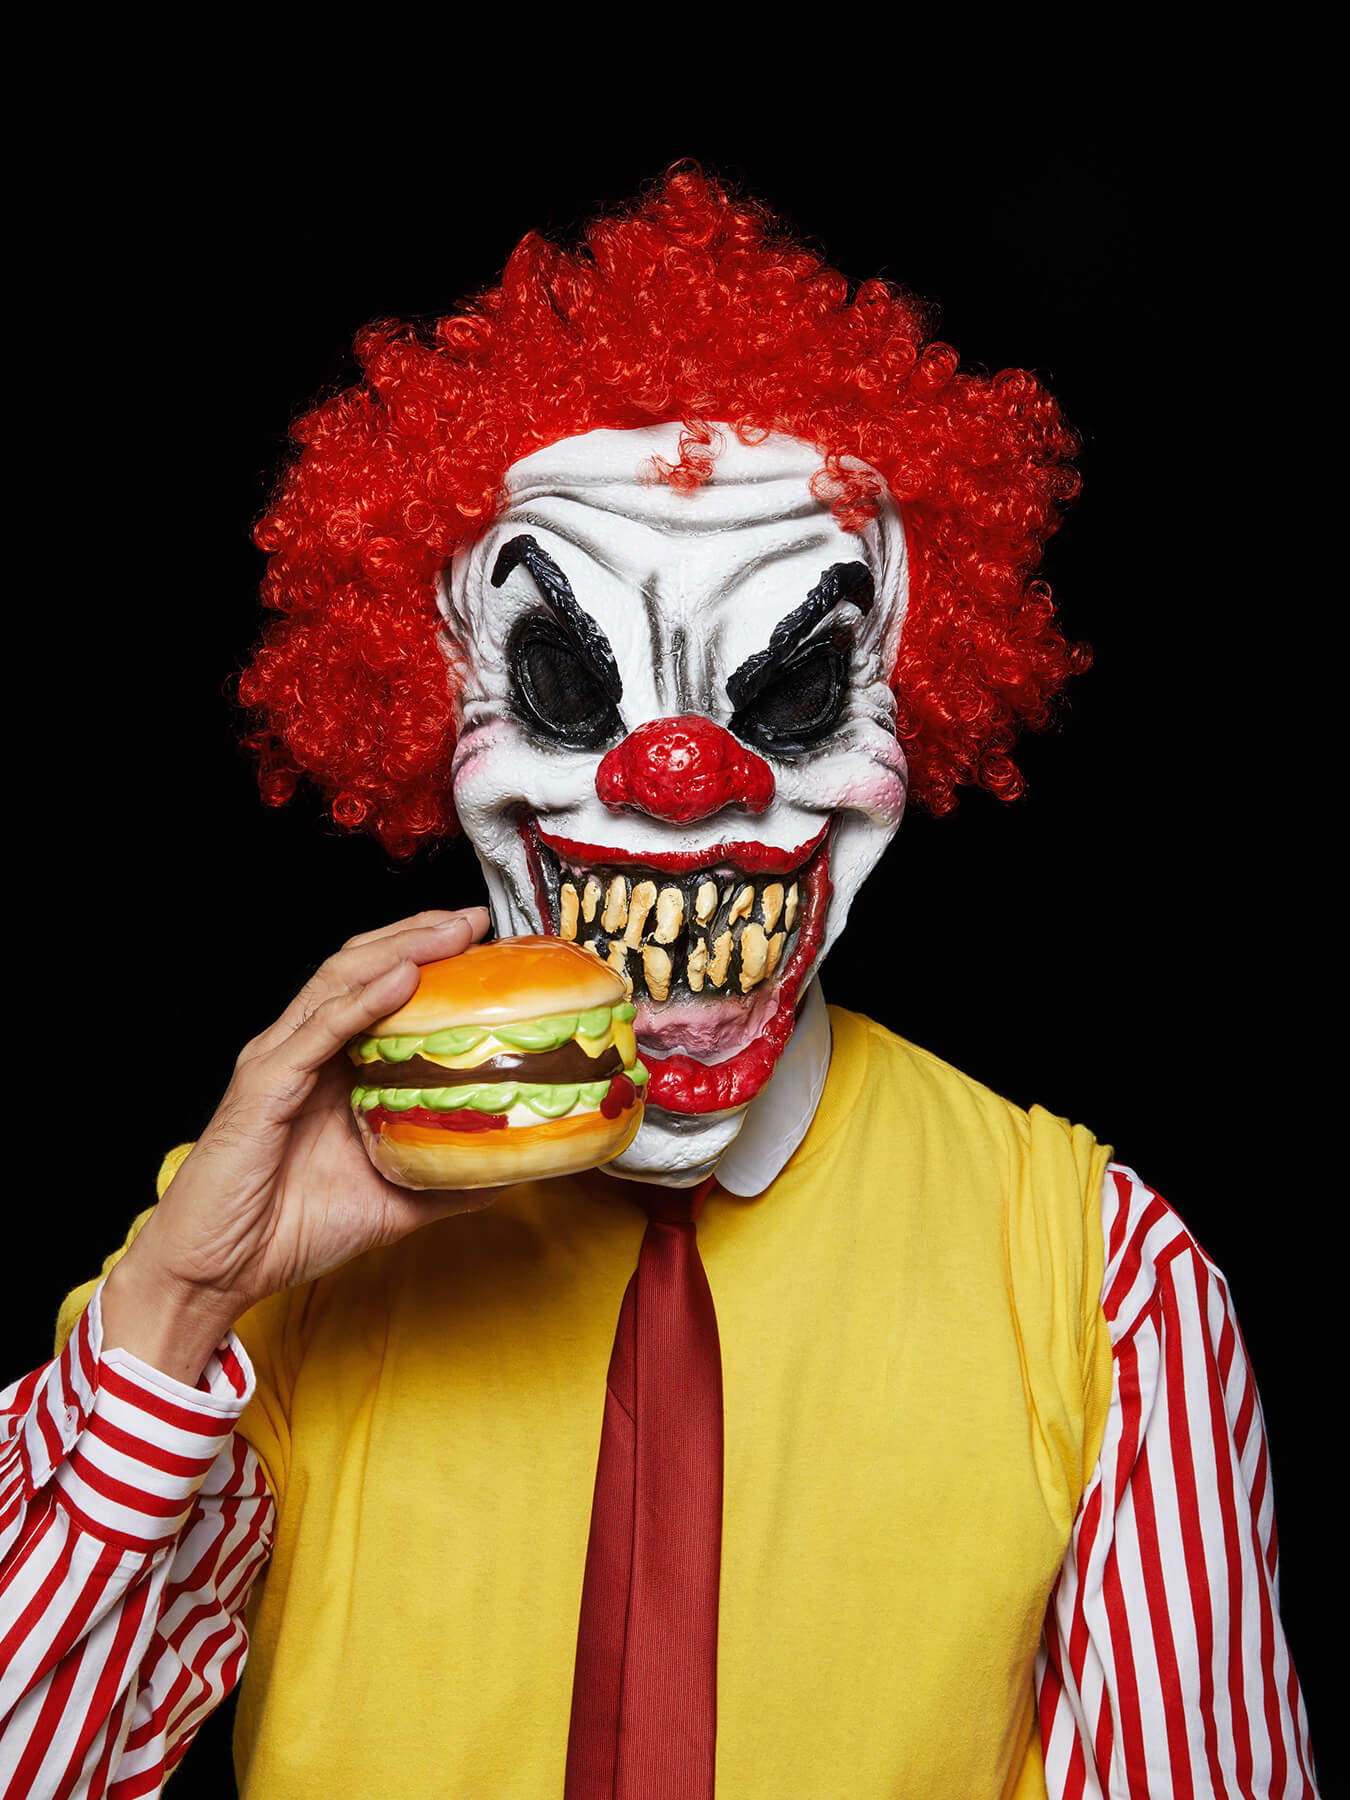 8 Oct 2017 HAPPY MEAL: Derong is dressed like Ronald McDonald and wearing a scary clown mask